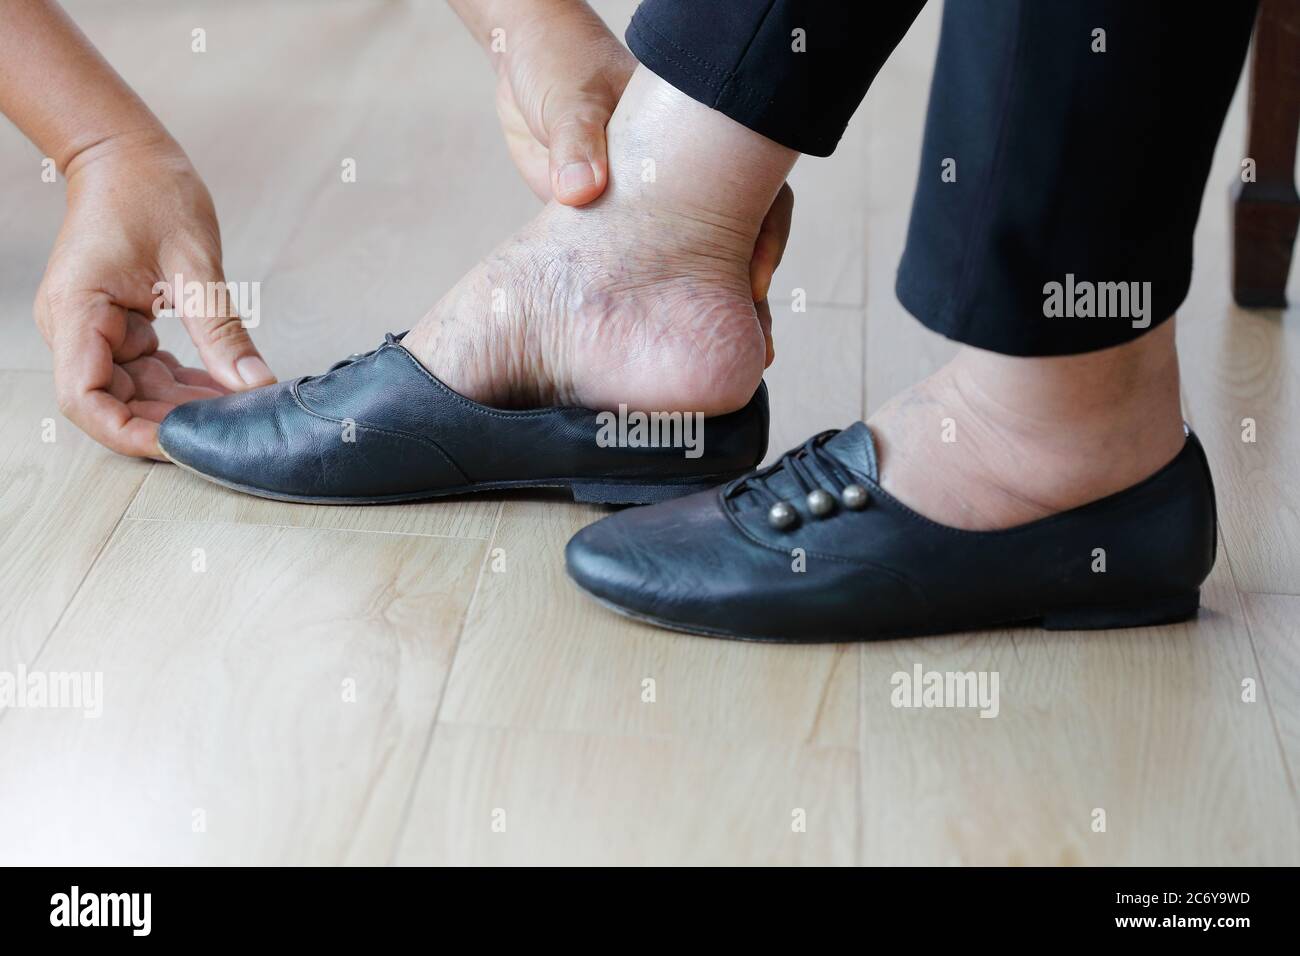 Elderly woman swollen feet putting on shoes with care giver. Stock Photo